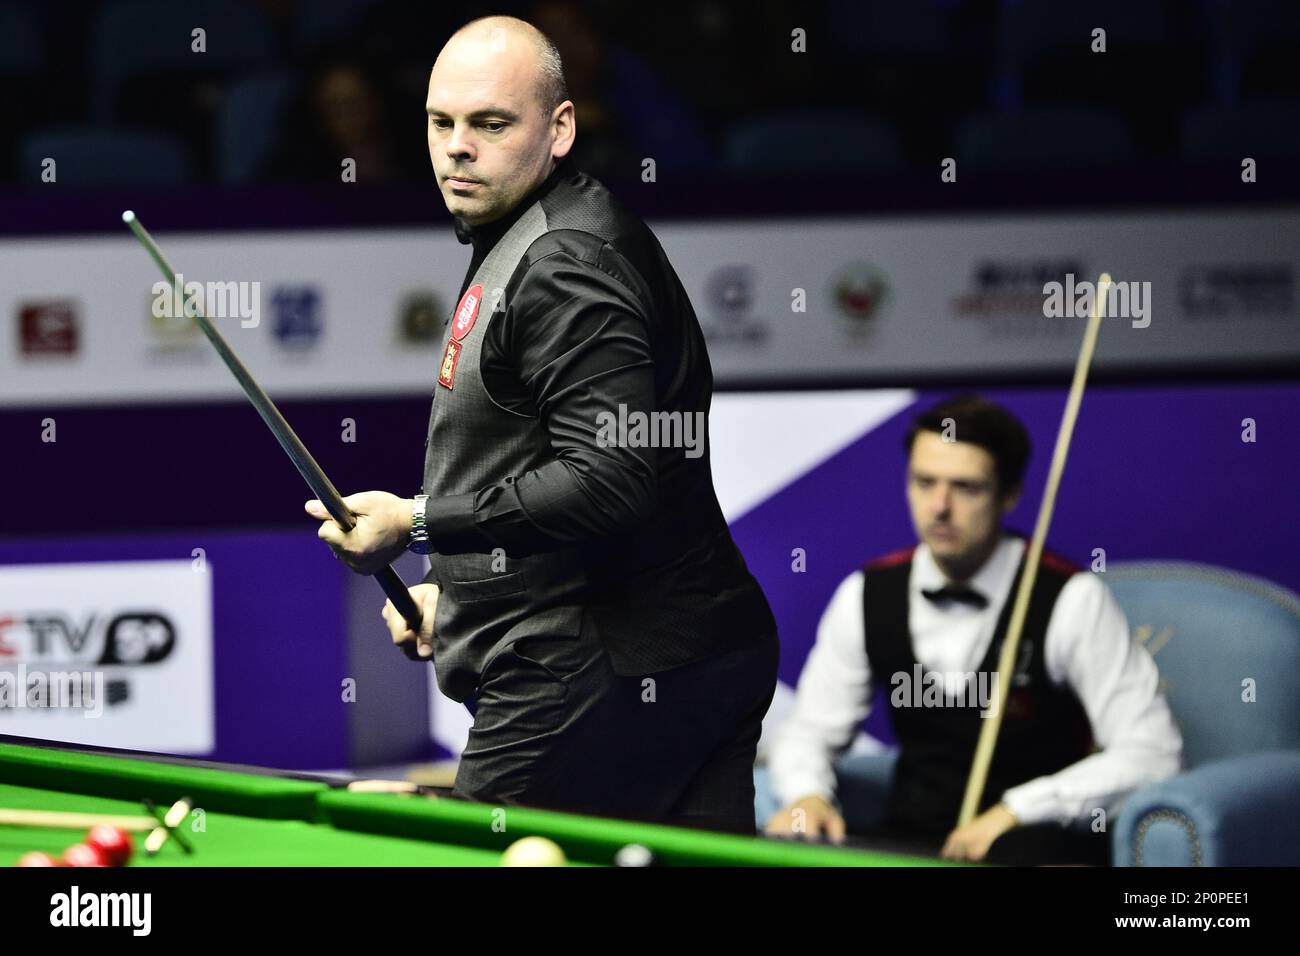 Stuart Bingham of England considers a shot against Michael Holt of England in their quarterfinal match during the World Snooker International Championship 2016 in Daqing city, northeast Chinas Heilongjiang province, 27 October